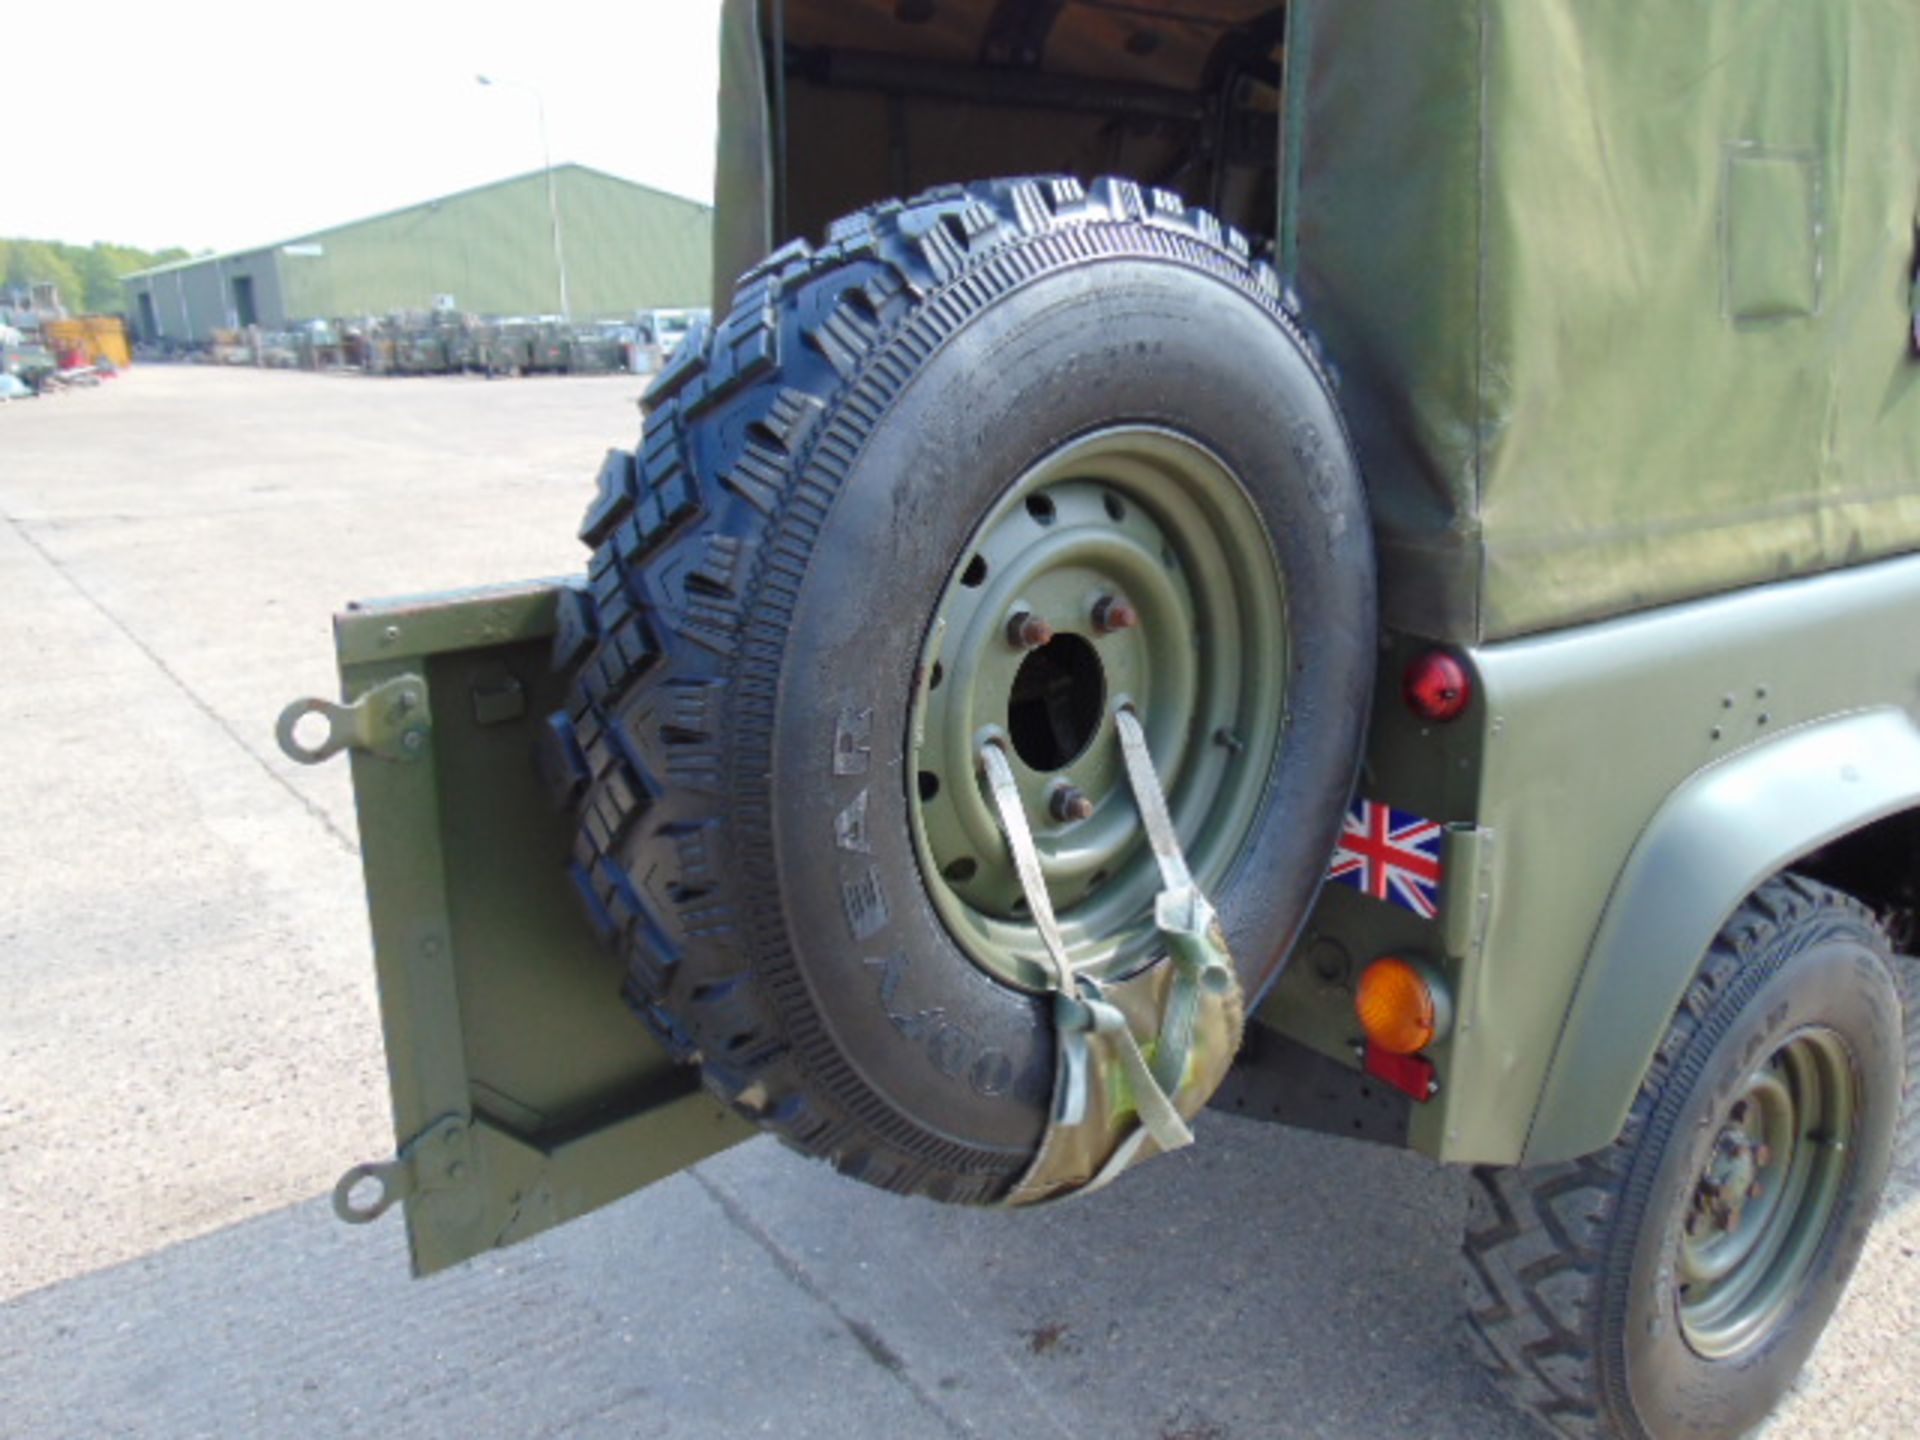 Military Specification Land Rover Wolf 90 Soft Top - Image 23 of 26